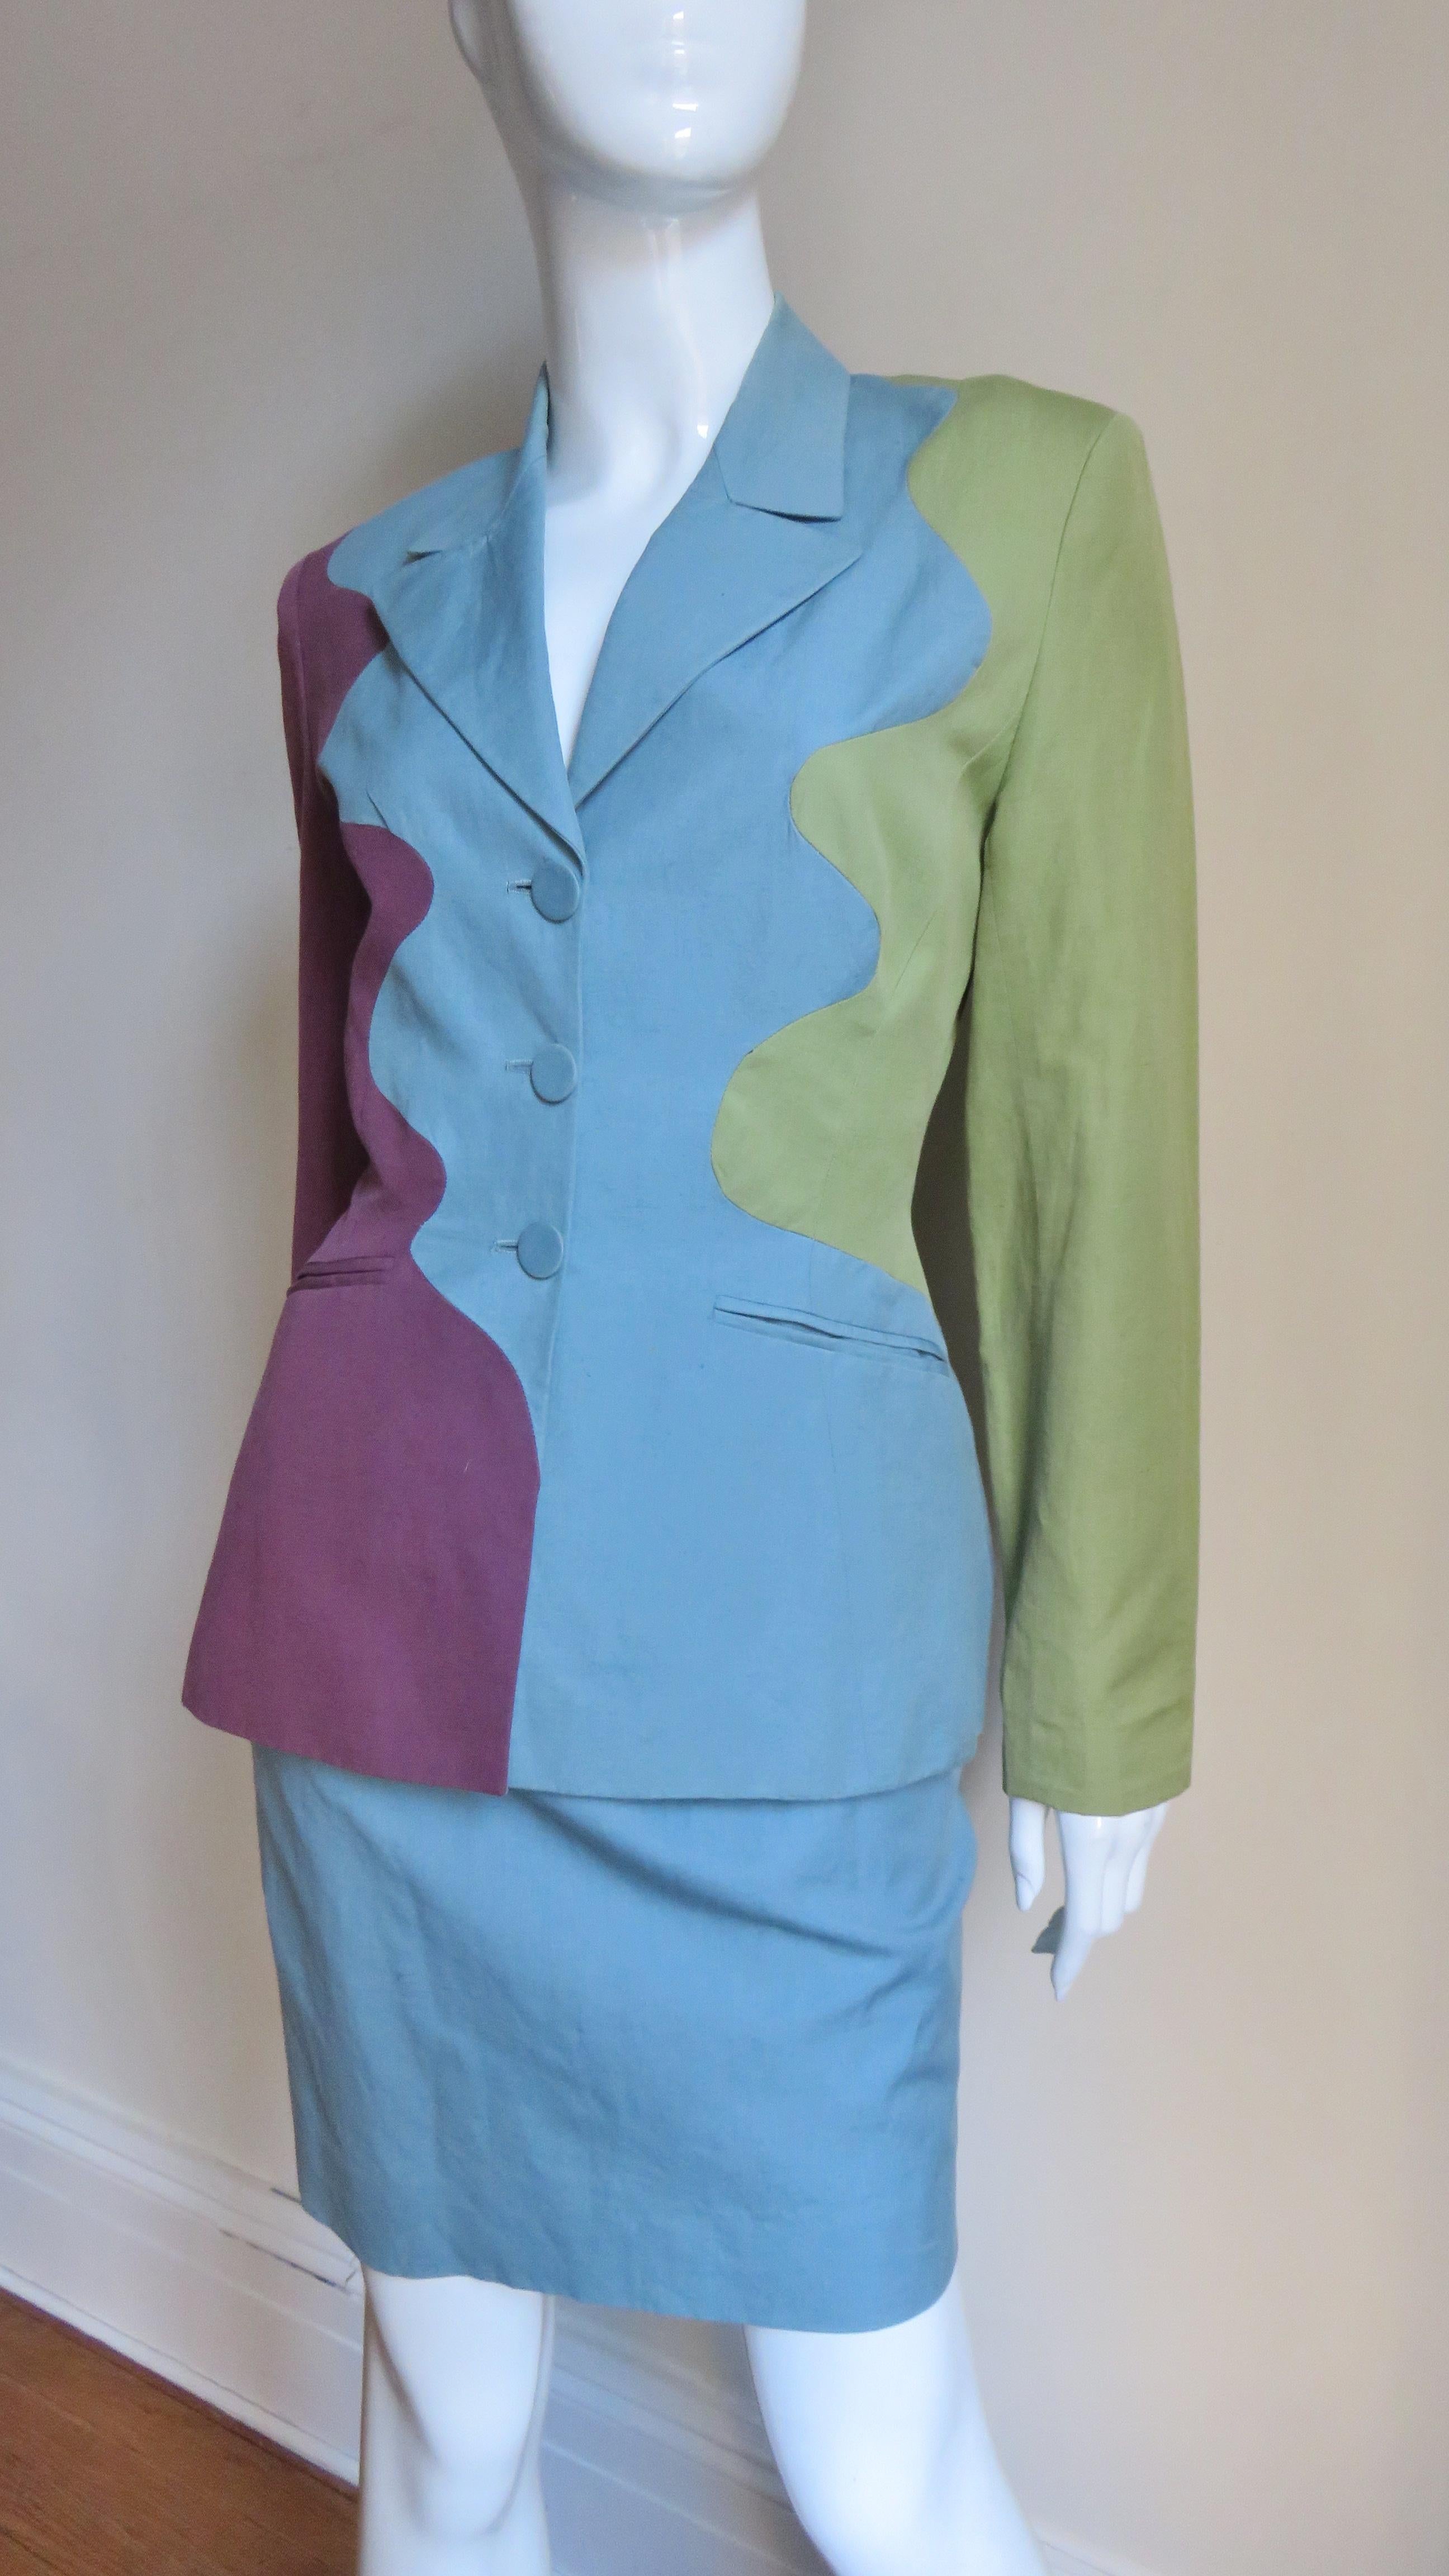 A pretty linen cotton linen blend skirt suit from Sophie Sitbon in blue, green and burgundy. The jacket has a lapel collar, welt hip pockets, small shoulder pads and button front and cuffs.  It is divided into the three wavy vertical panels each a